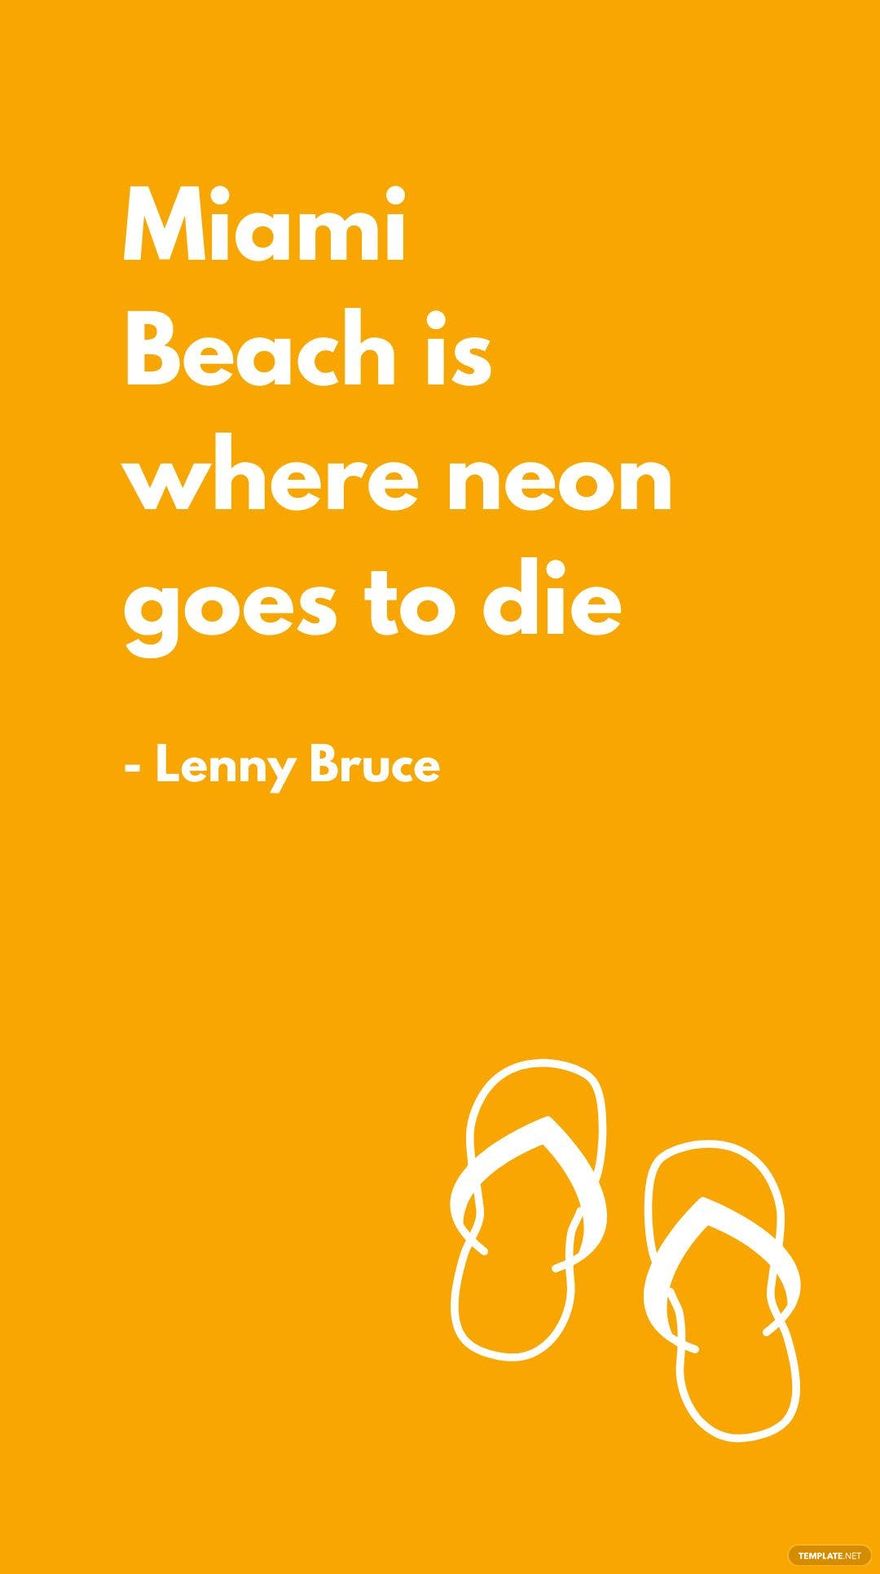 Lenny Bruce - Miami Beach is where neon goes to die